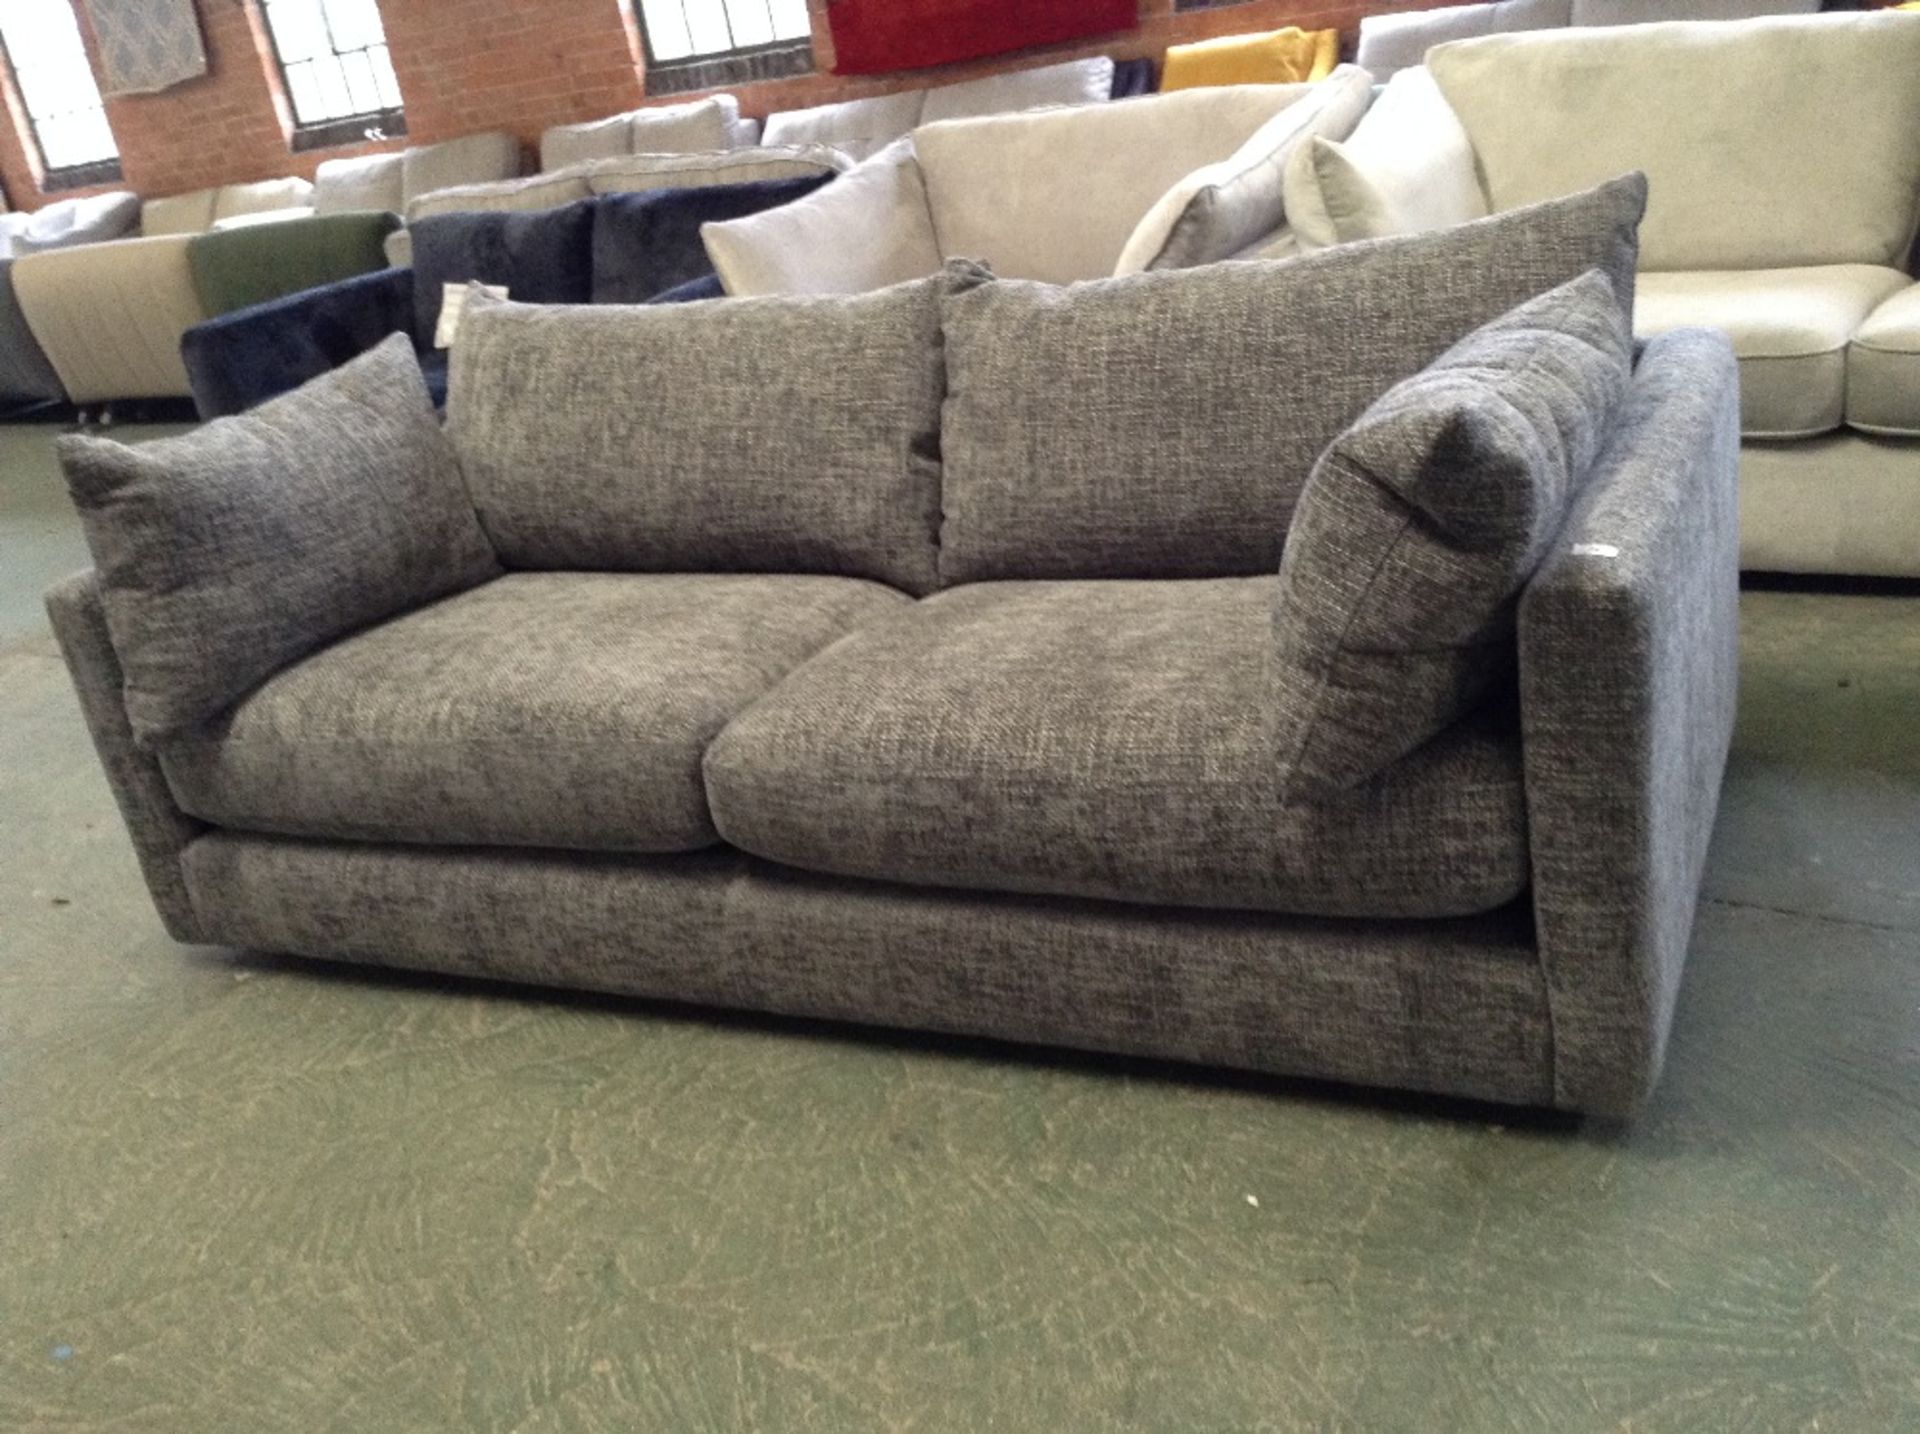 EX SHOWROOM GREY PATTERNED LARGE 3 SEATER SOFA